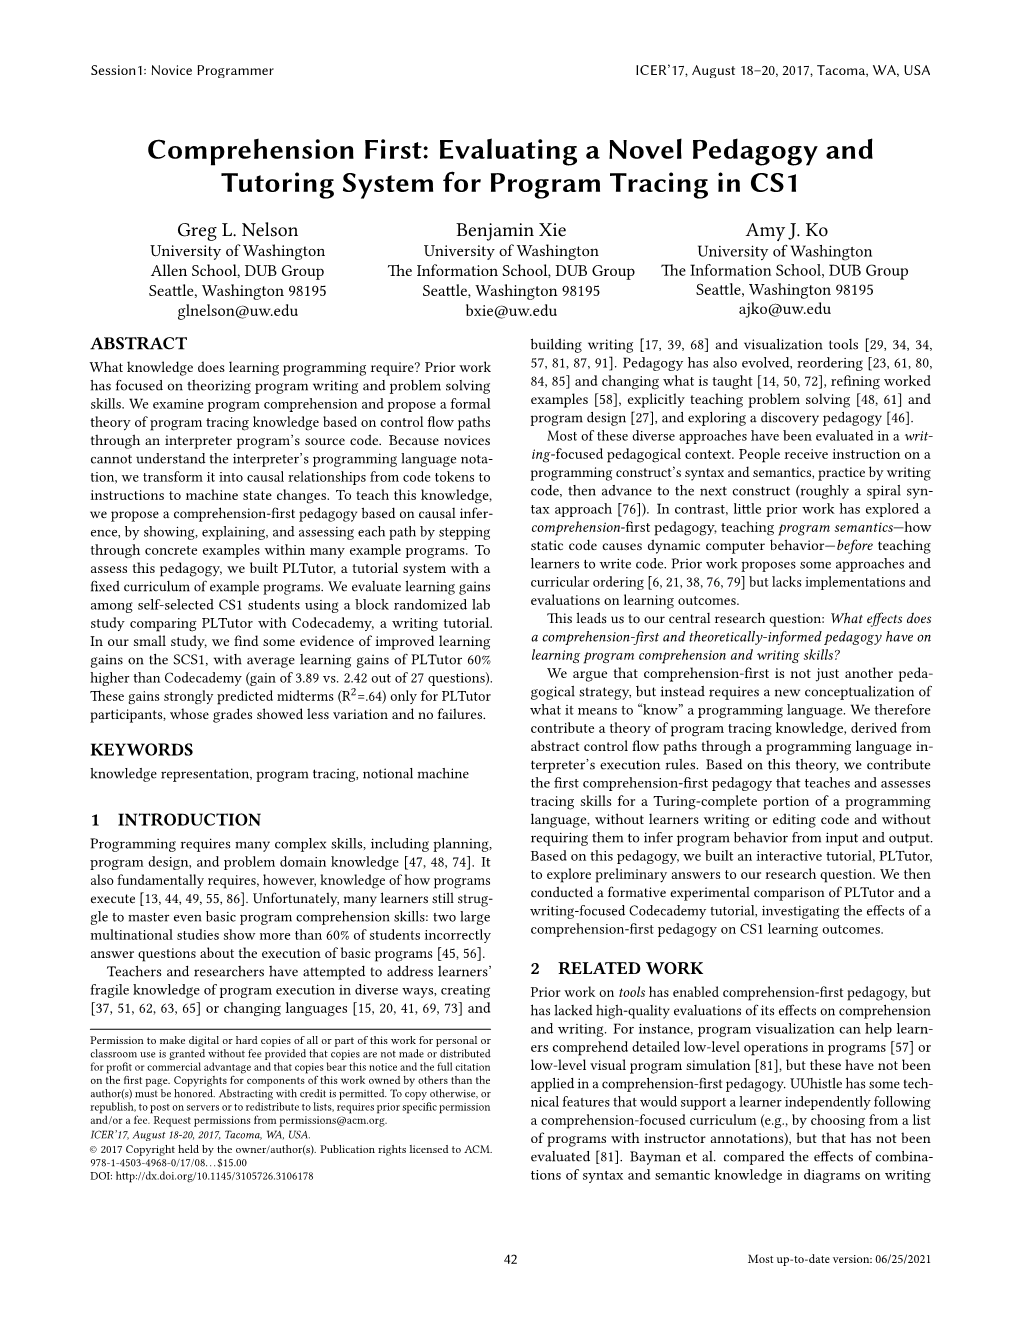 Comprehension First: Evaluating a Novel Pedagogy and Tutoring System for Program Tracing in CS1